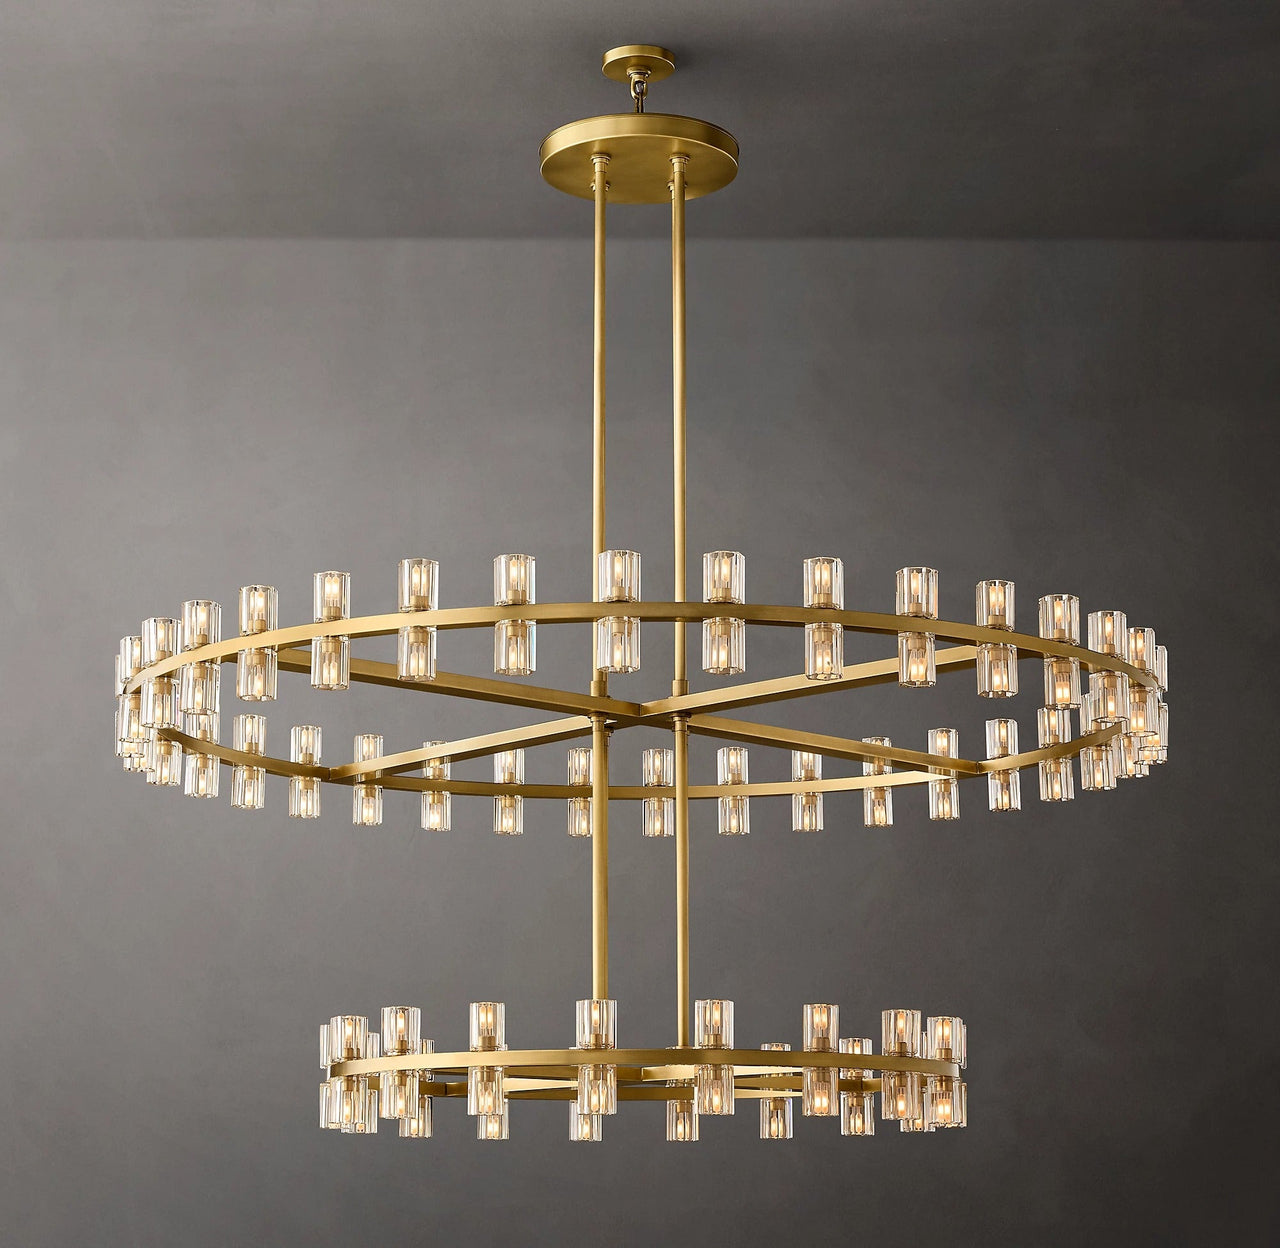 All Copper Luxury Large Crystal Chandelier